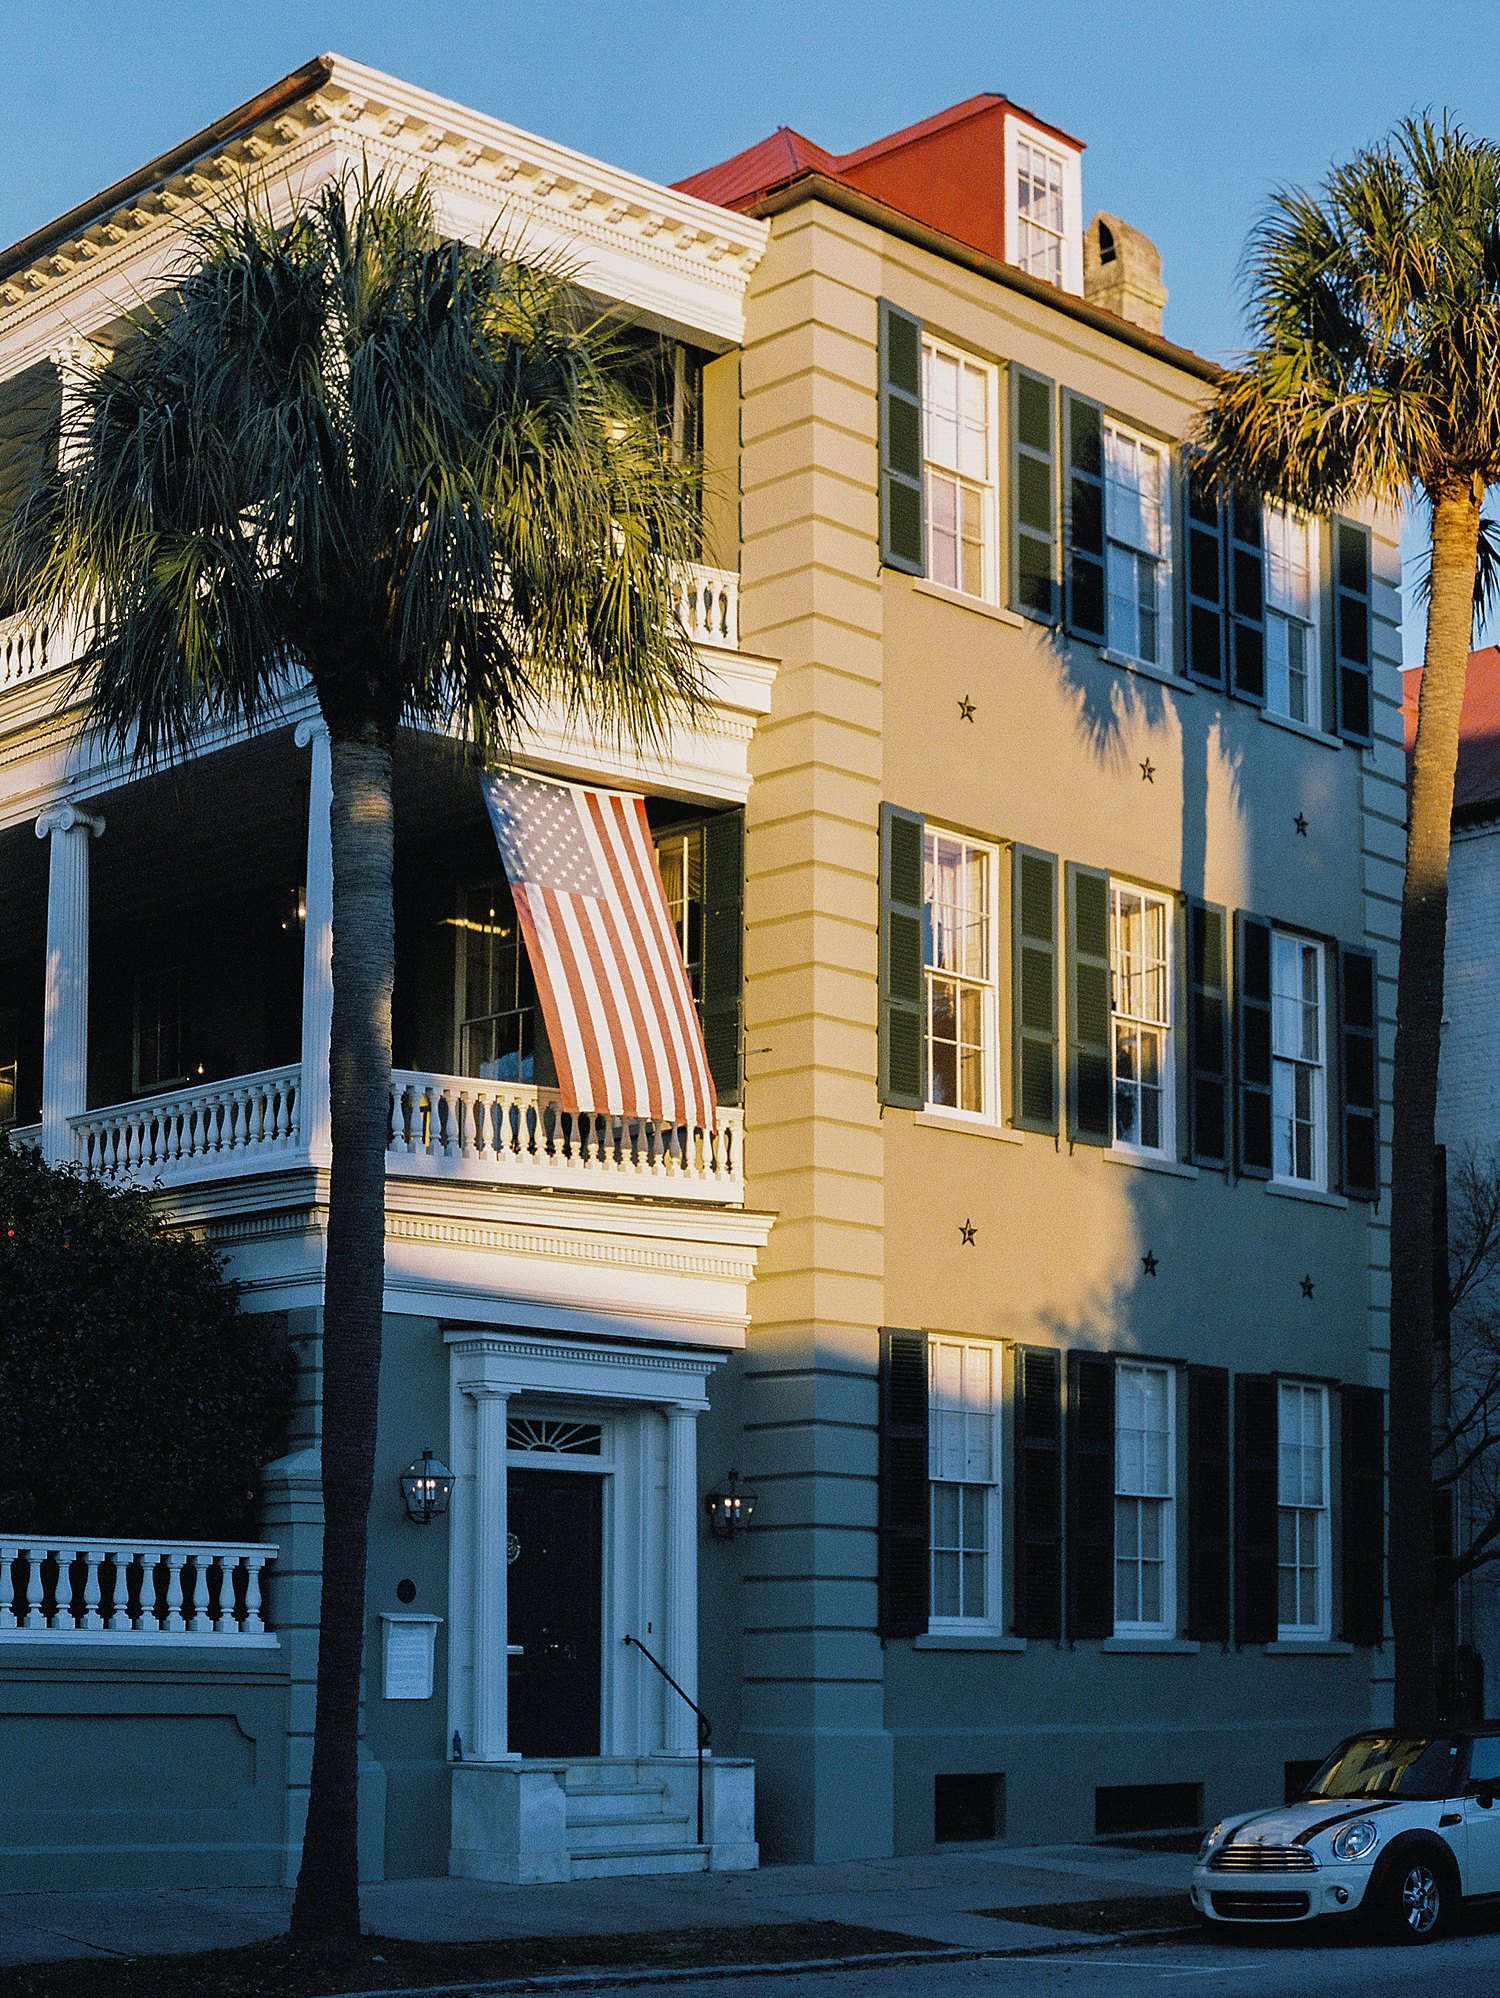 three story home in Charleston South Carolina with palm trees and American flag